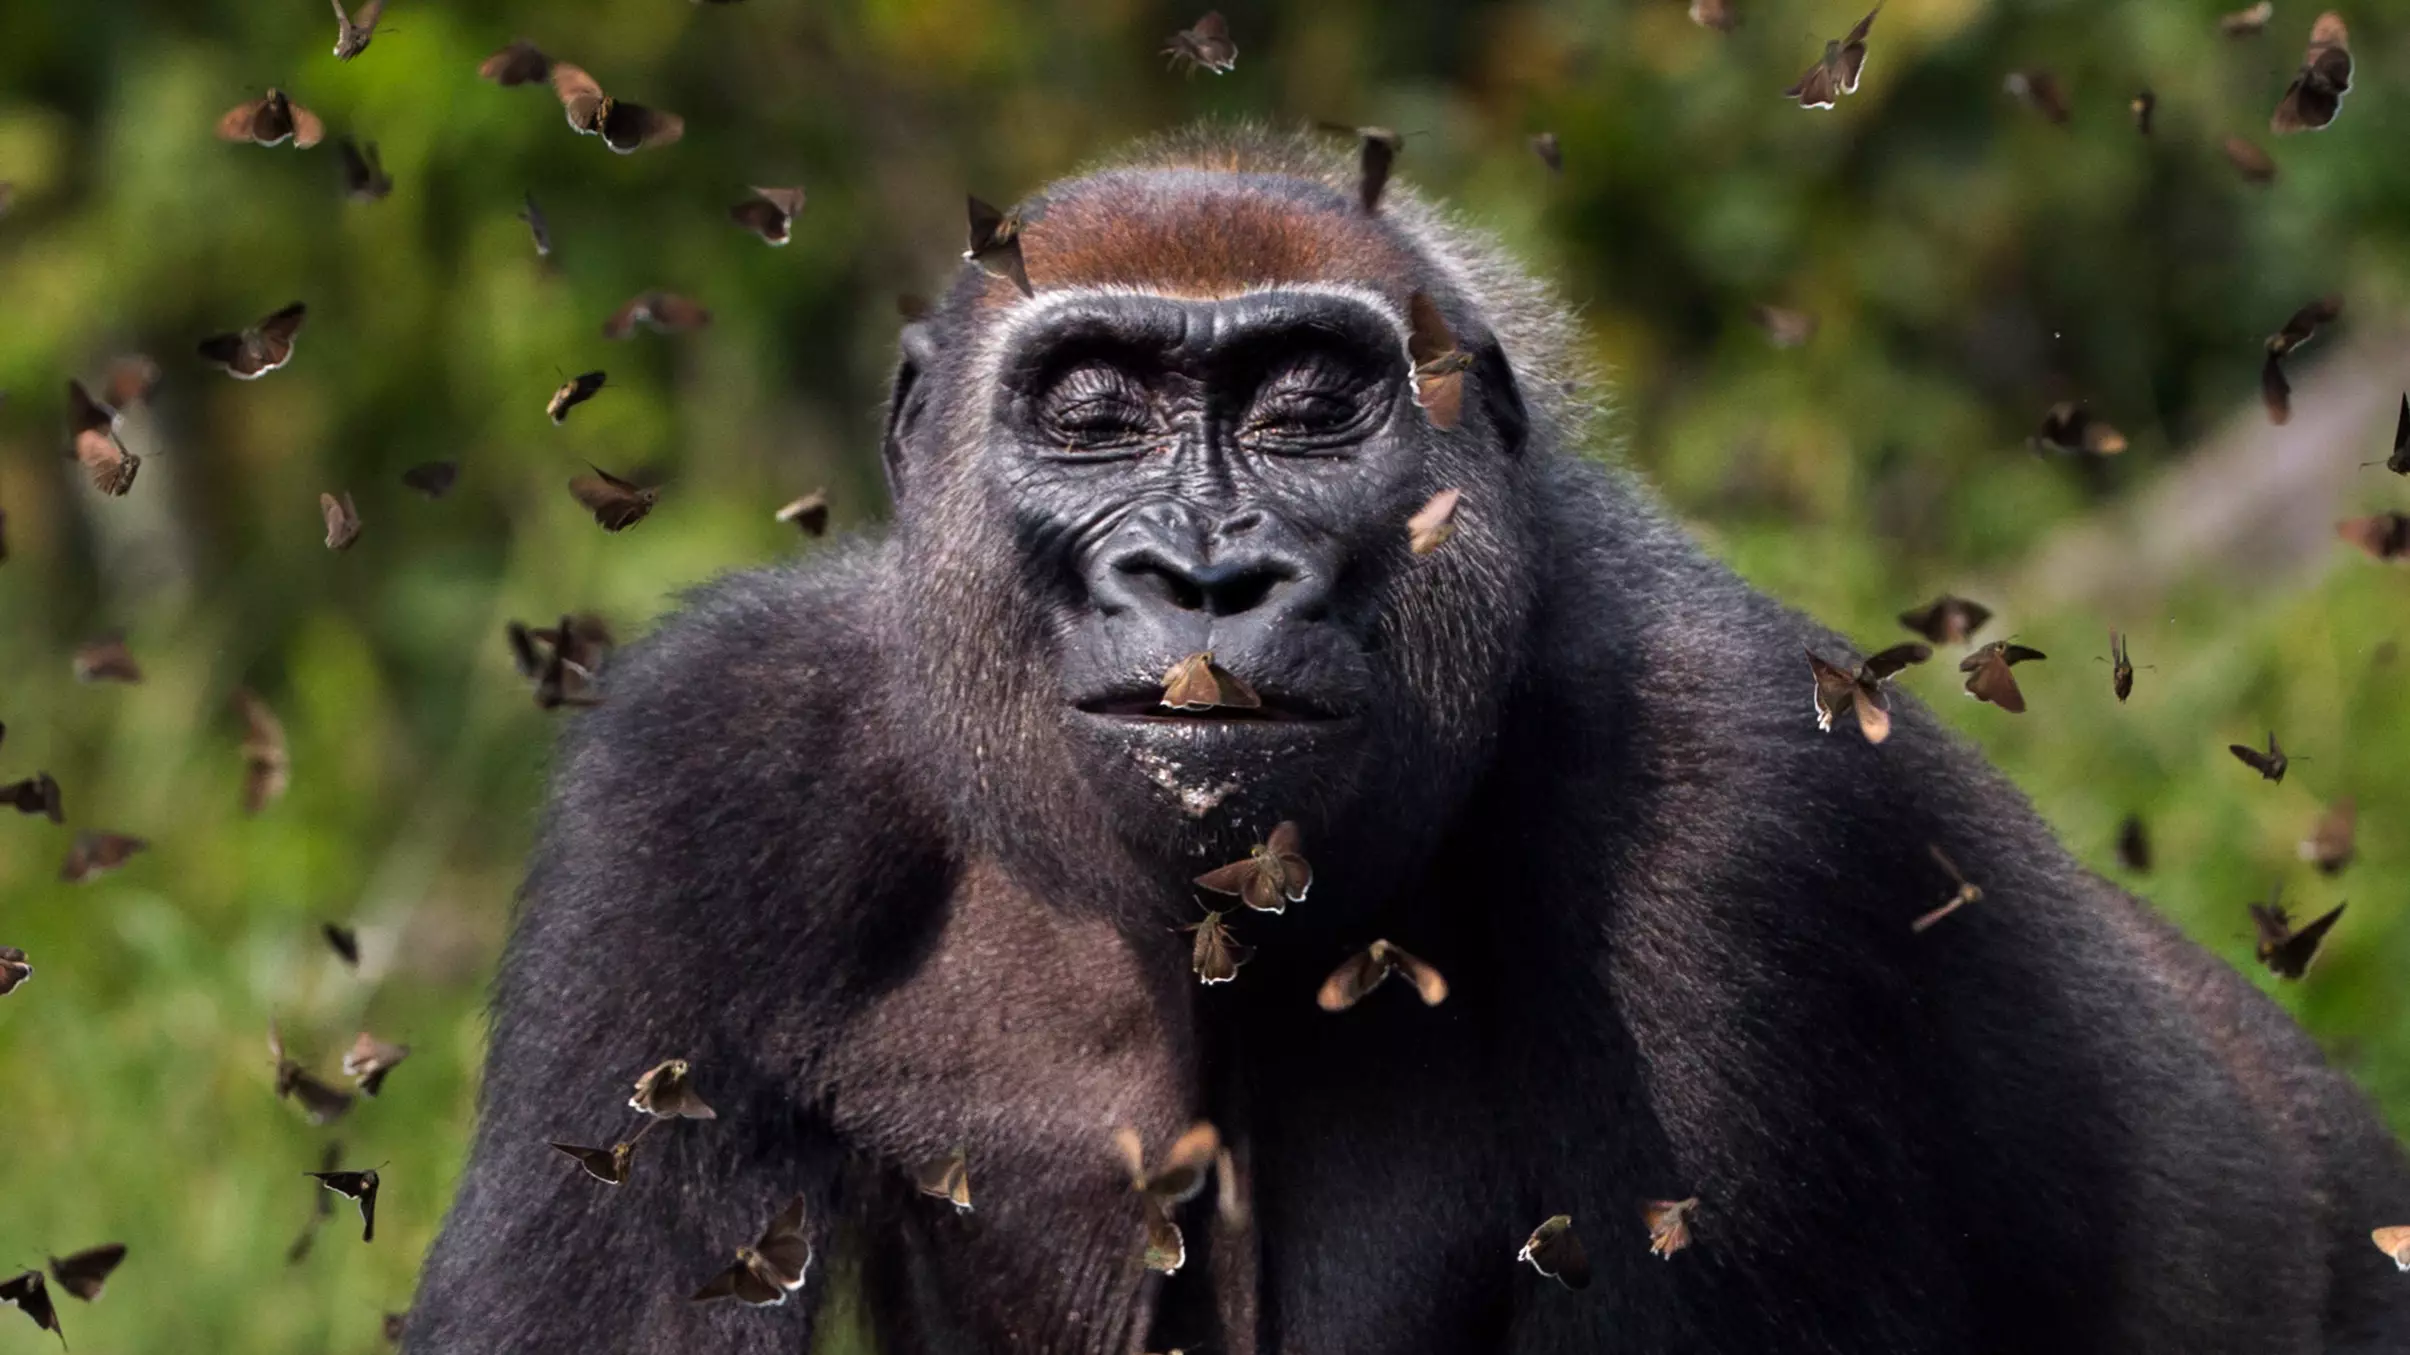 Stunning Image Of Gorilla Surrounded By Butterflies Wins Photography Competition 